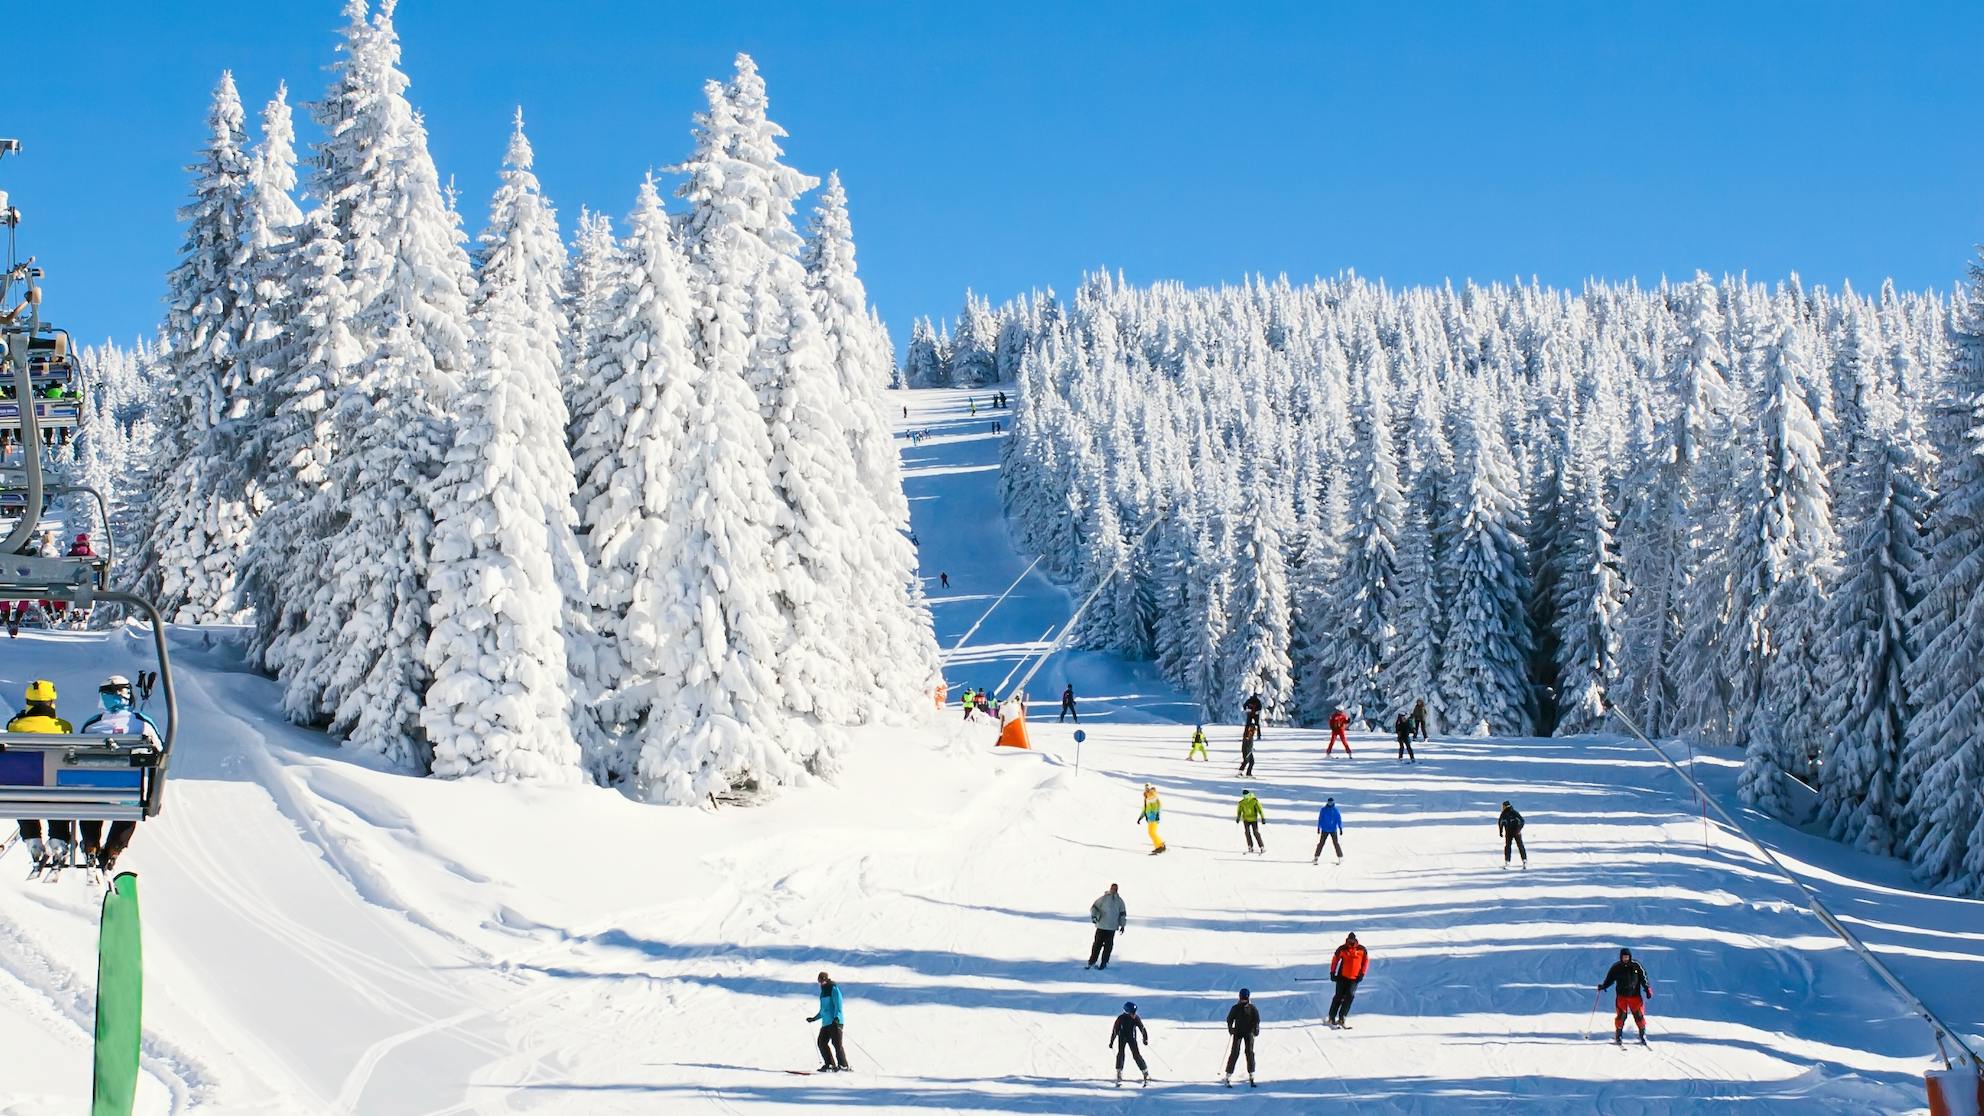 Skiers ride up a lift and ski down a hill at a ski resort.